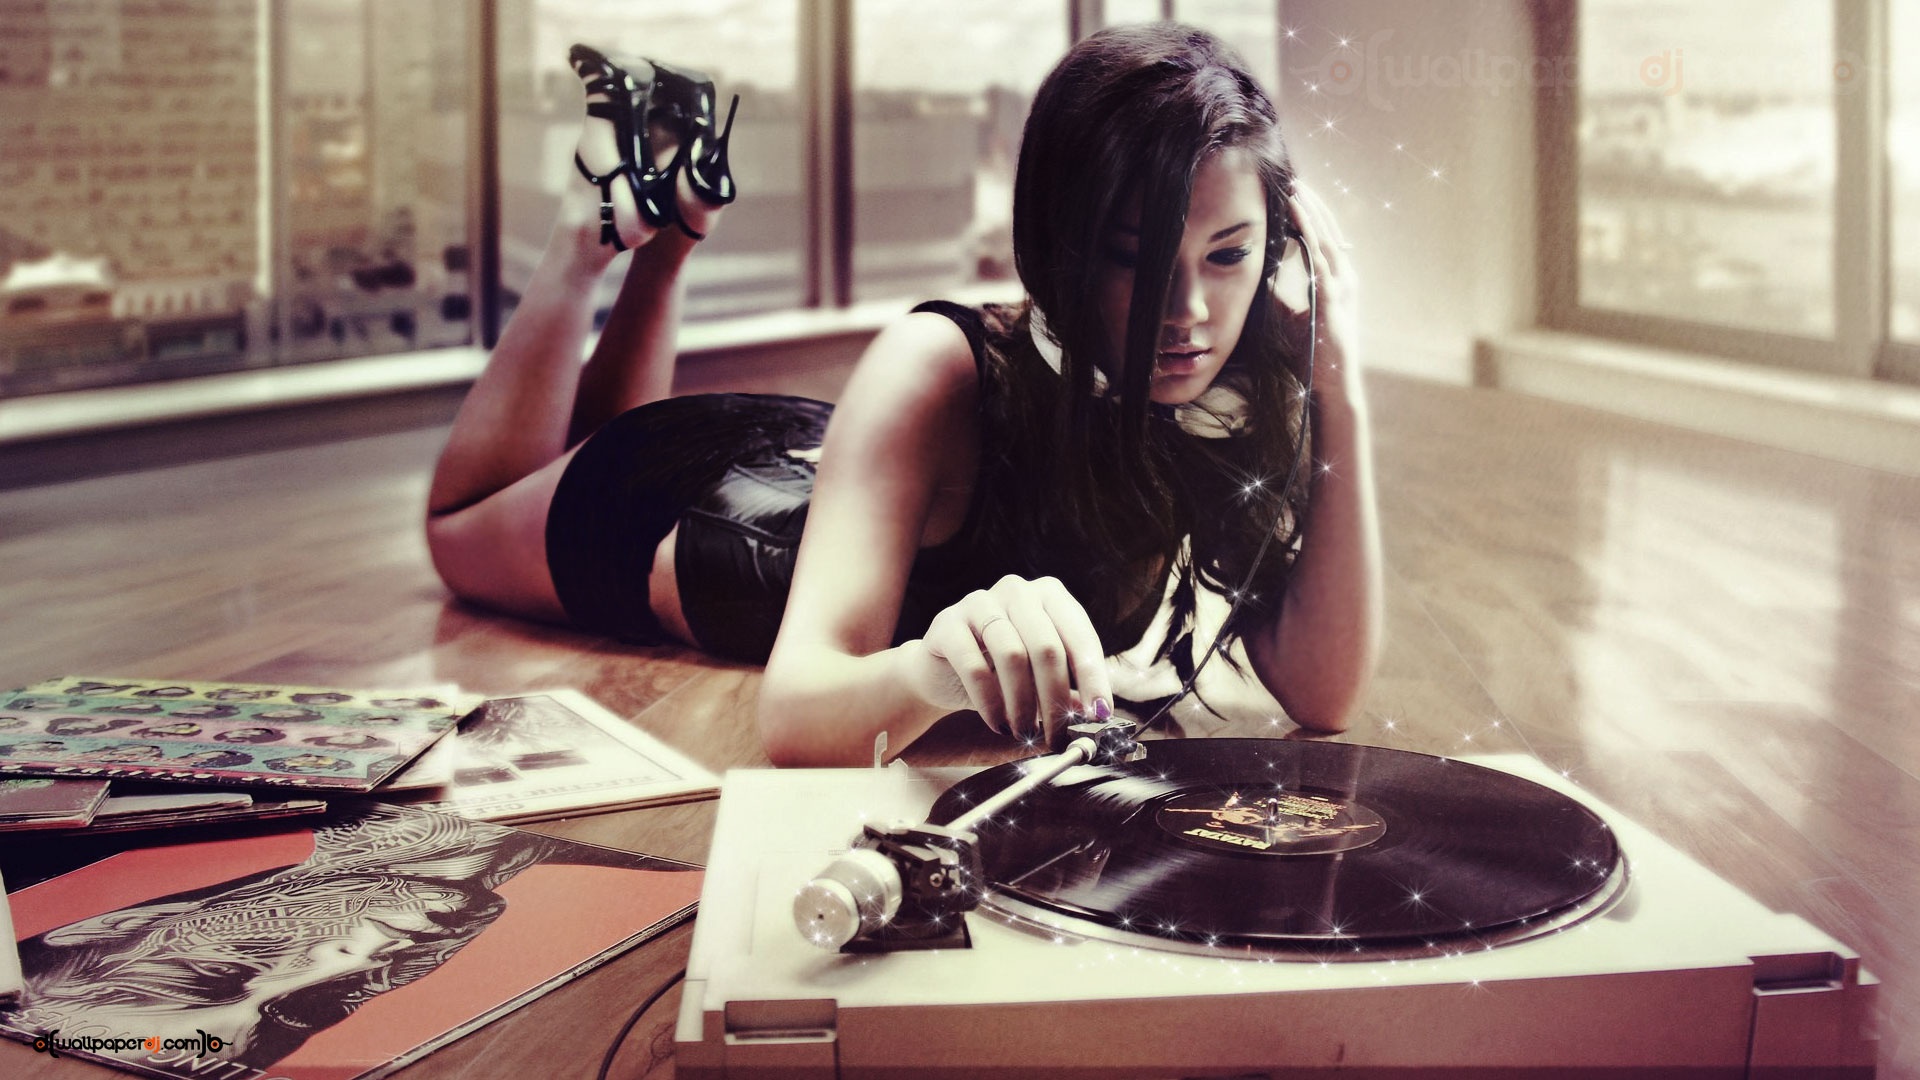 Music Record HD Wallpaper | Background Image